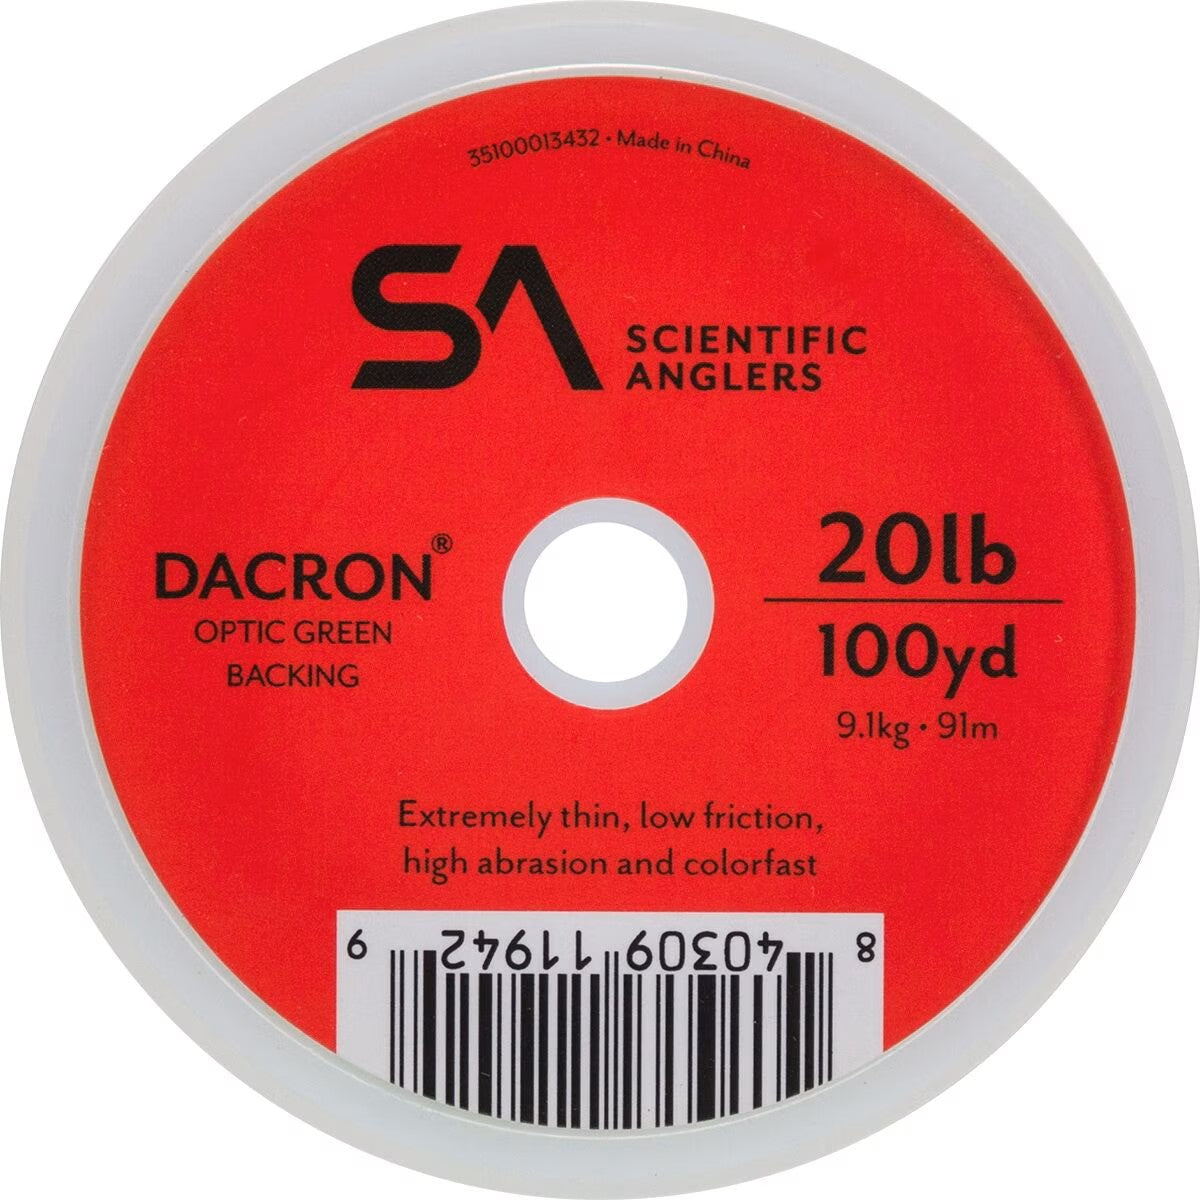 Scientific Anglers Dacron Backing in Optic Green 20lb - 200yds+